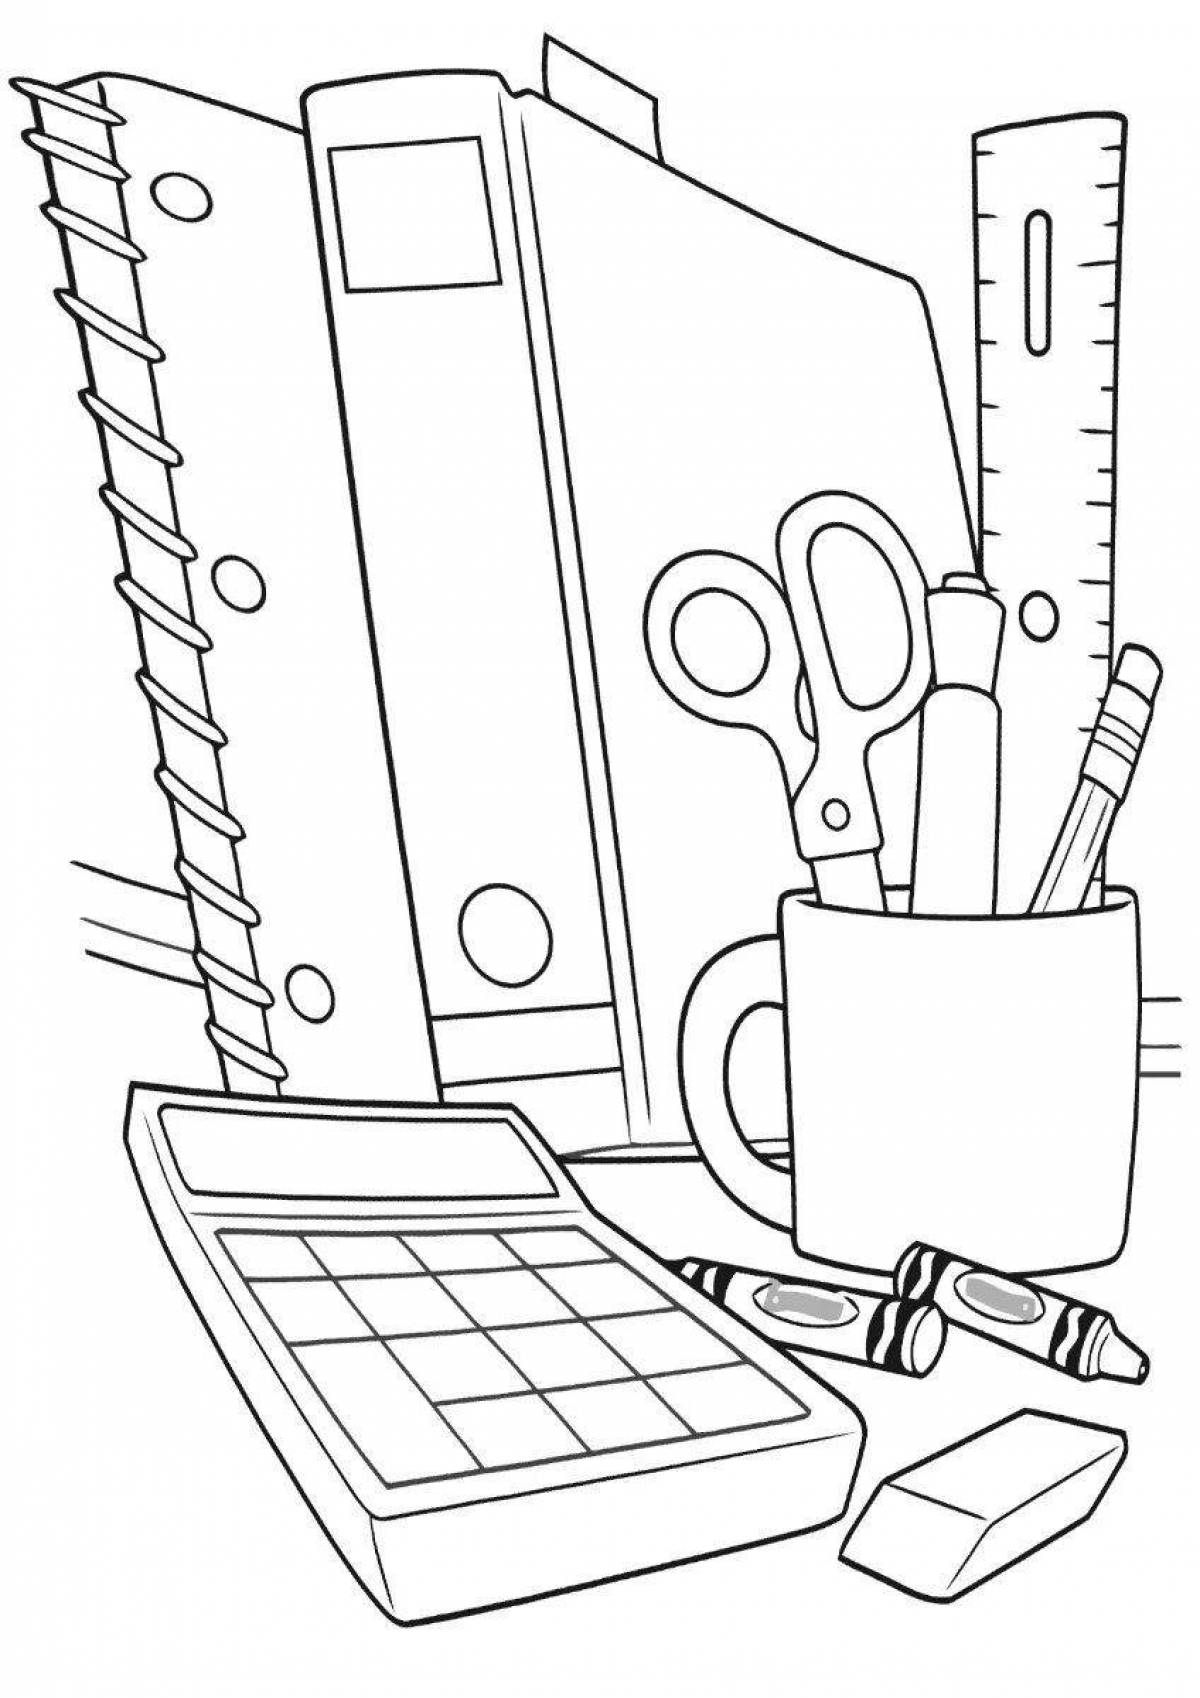 Coloring page happy school subjects